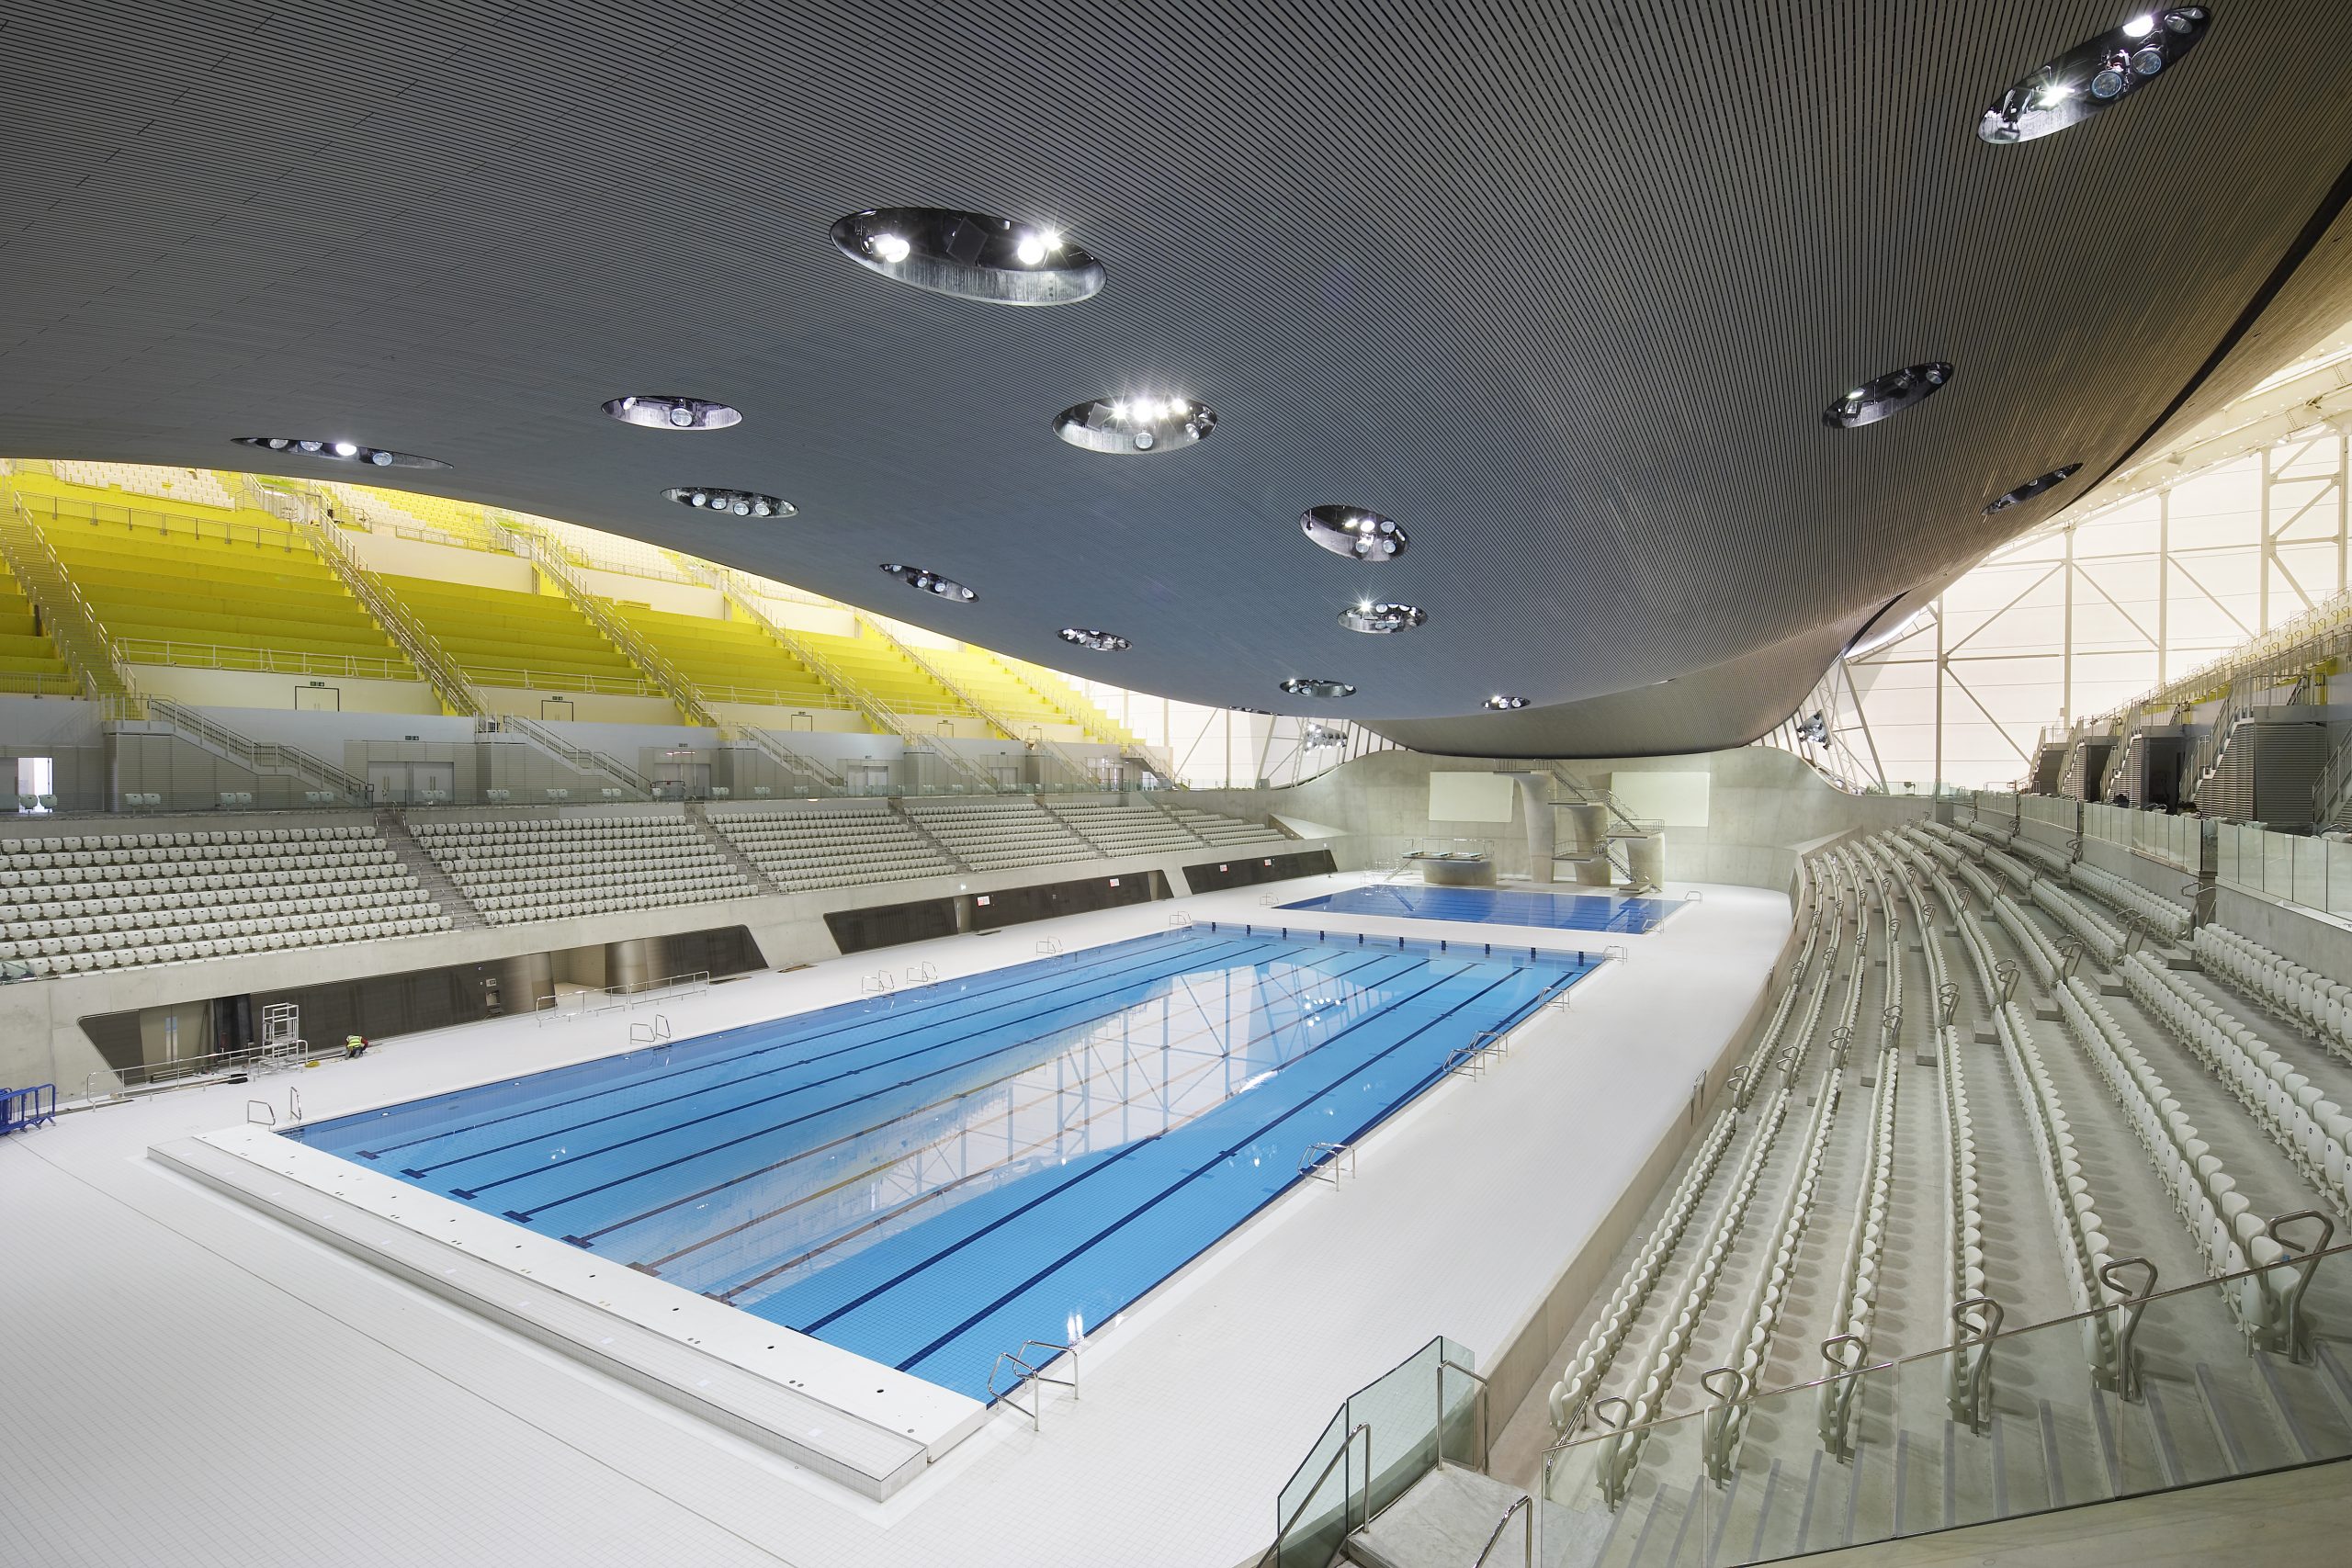 The photographers Hufton + Crow own the copyright of these images of the London Aquatics Centre by Zaha Hadid Architects.